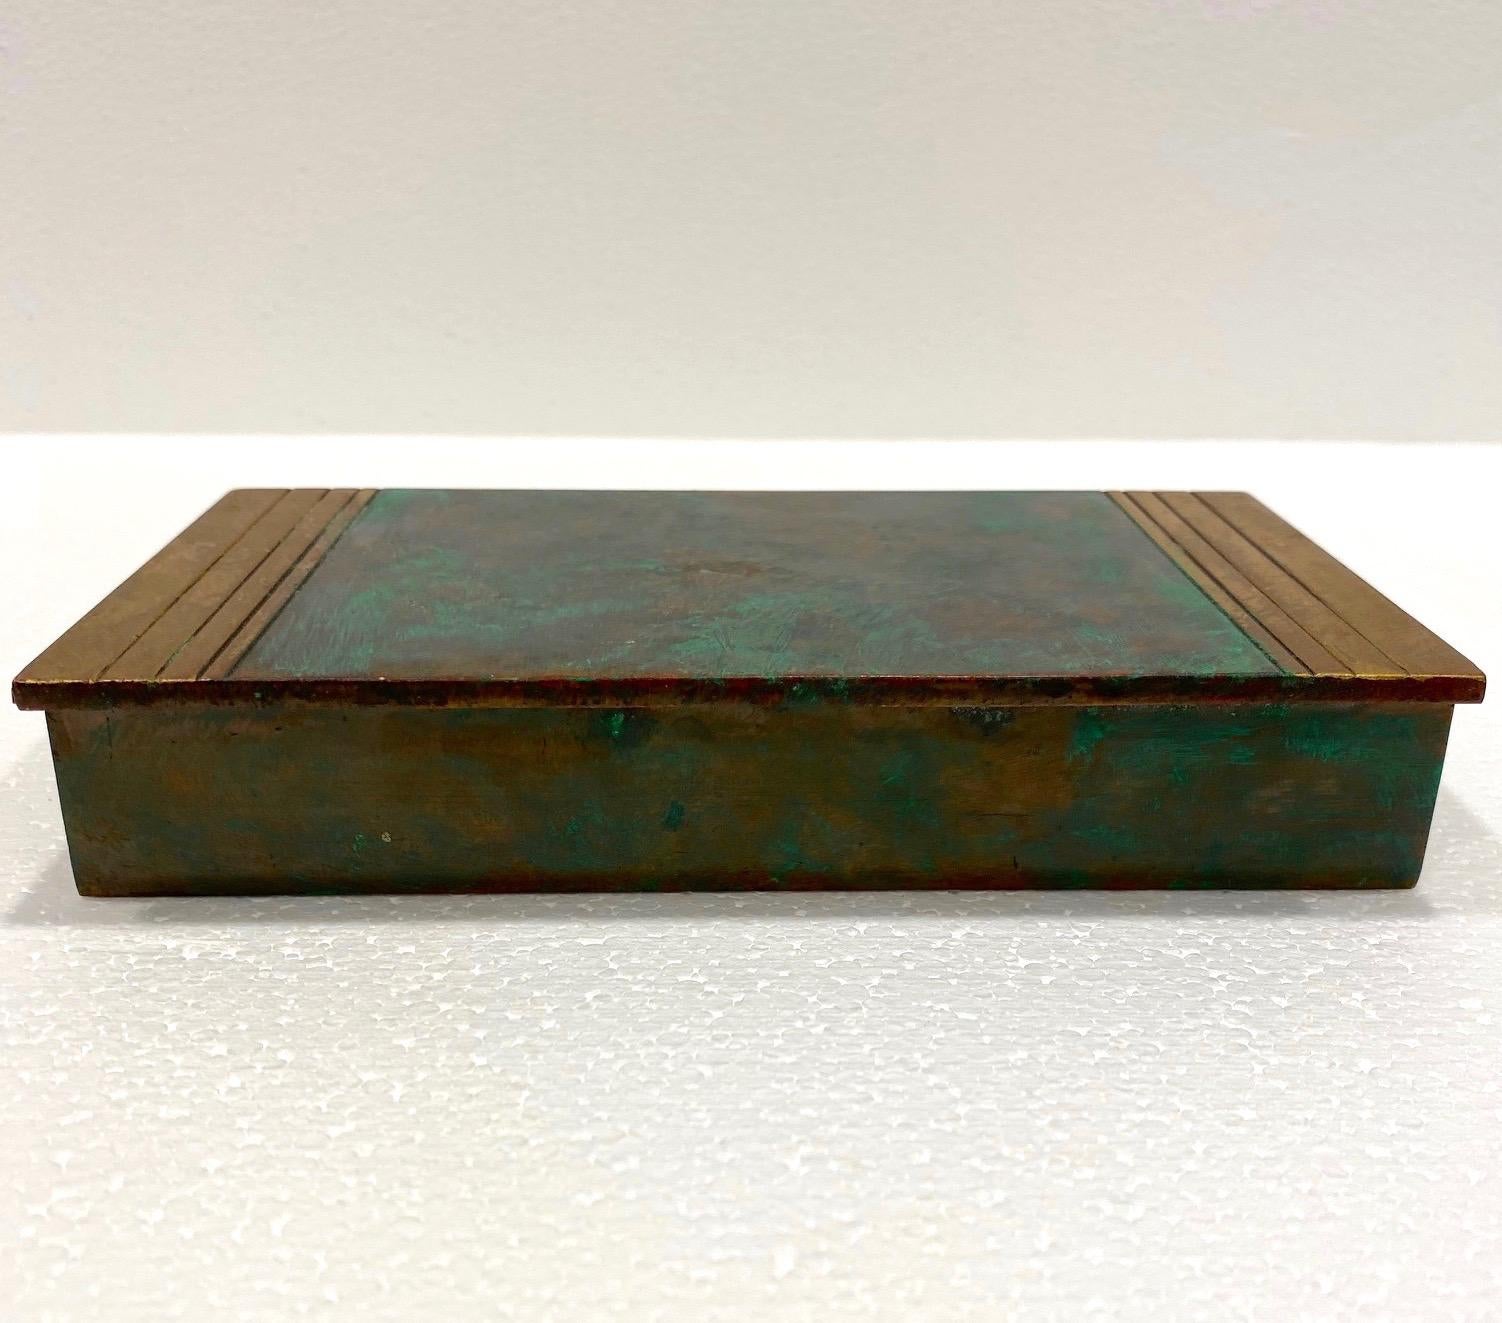 Patinated Art Deco Bronze Box with Green Patina by Silver Crest Bronze, circa 1940